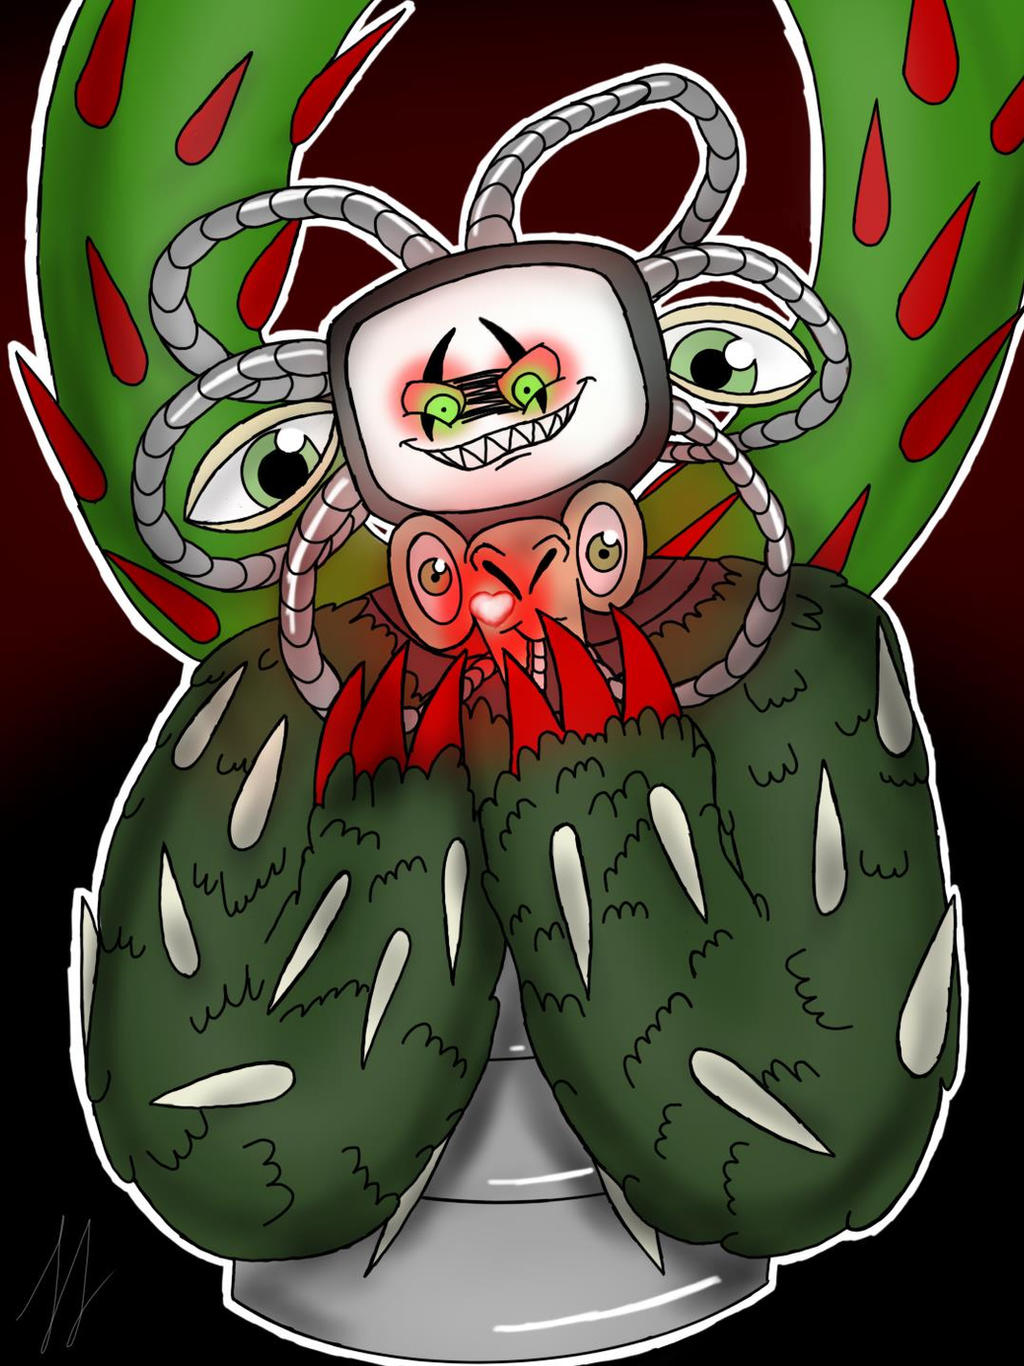 omega flowey unused faces by s-a-ns on DeviantArt